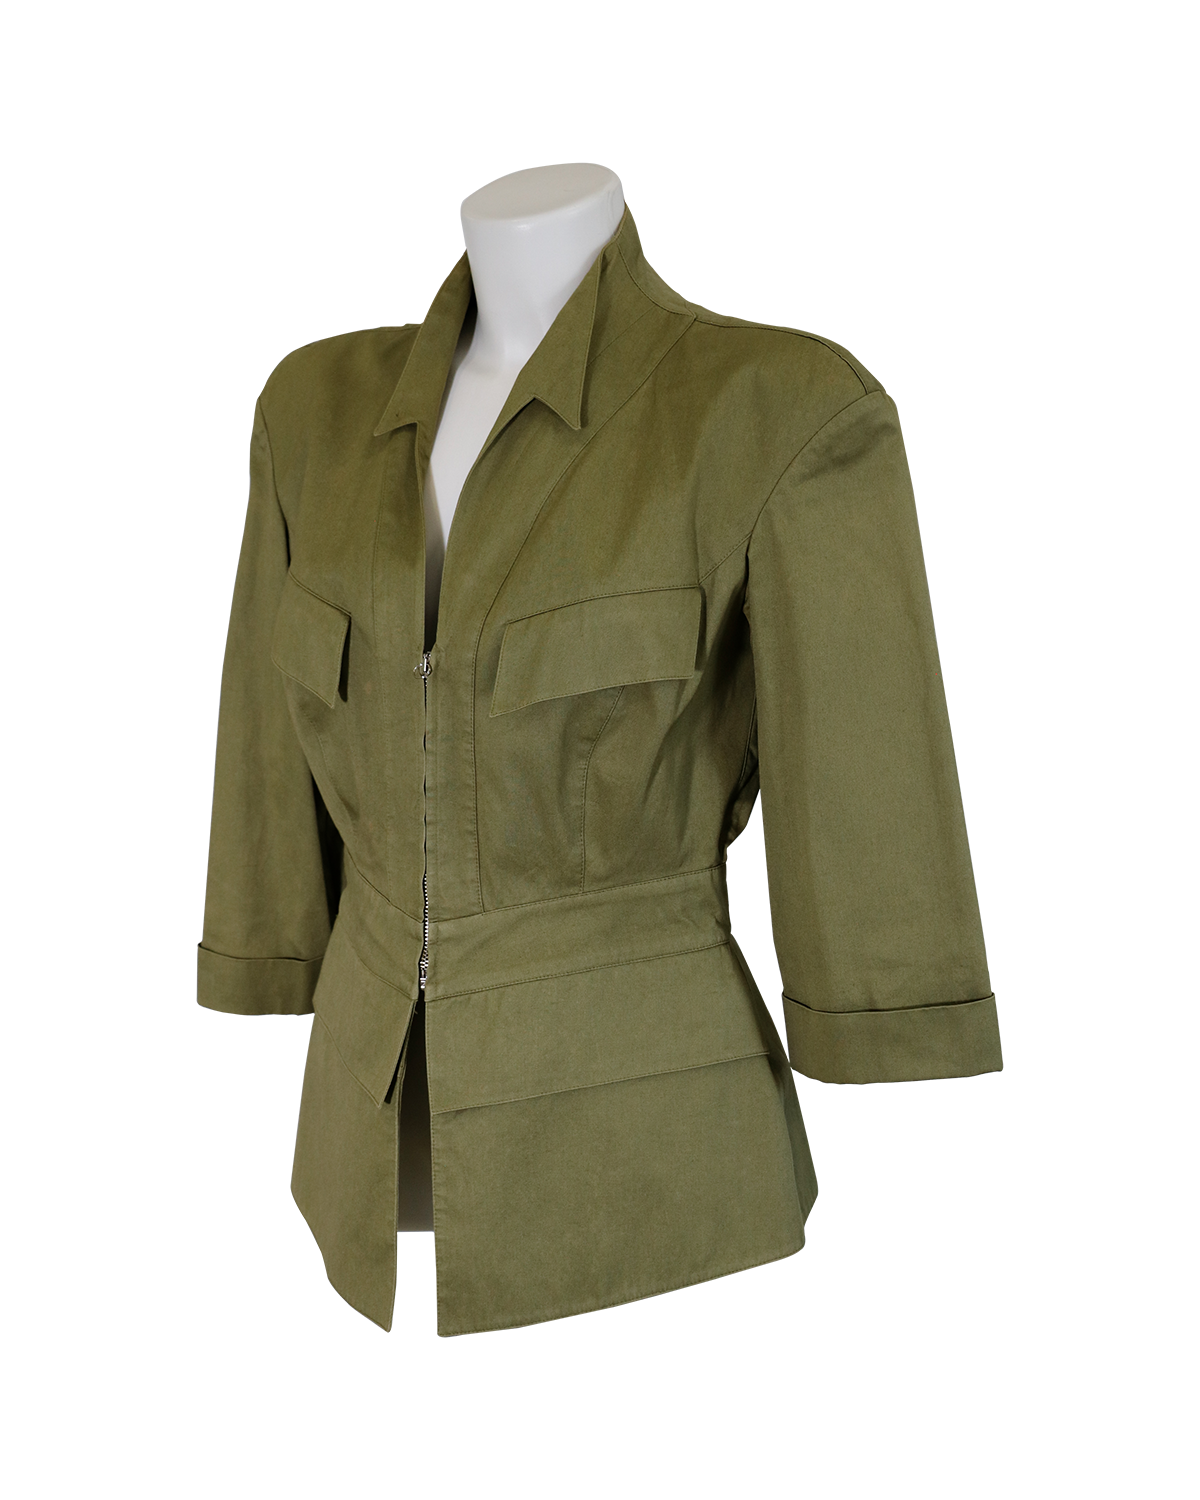 Thierry Mugler Military Jacket from 1990s